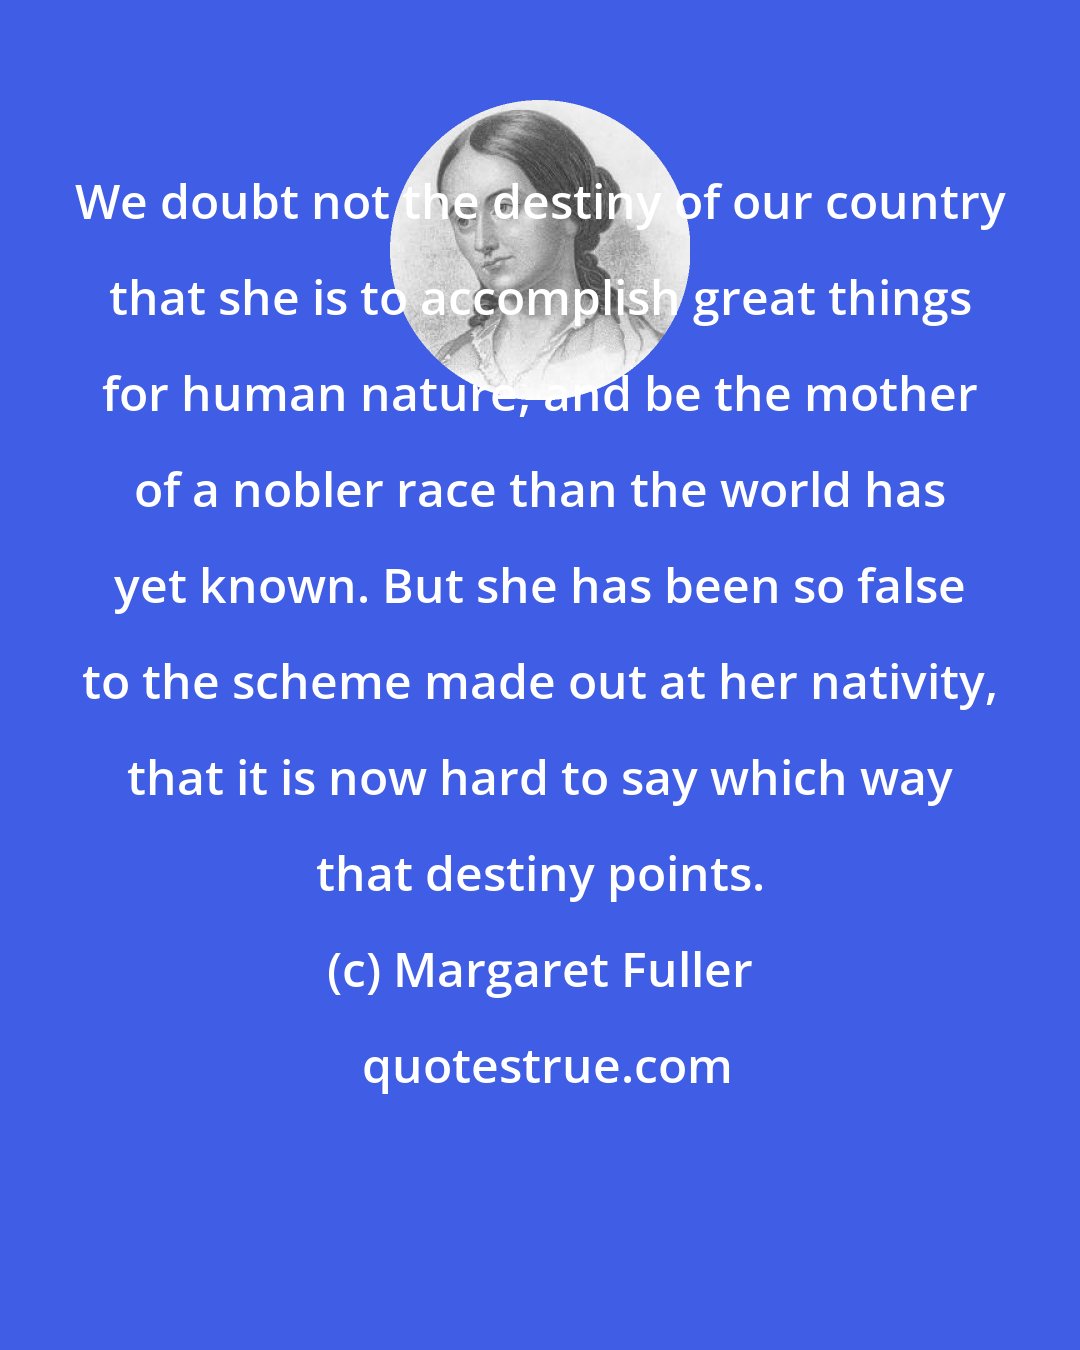 Margaret Fuller: We doubt not the destiny of our country that she is to accomplish great things for human nature, and be the mother of a nobler race than the world has yet known. But she has been so false to the scheme made out at her nativity, that it is now hard to say which way that destiny points.